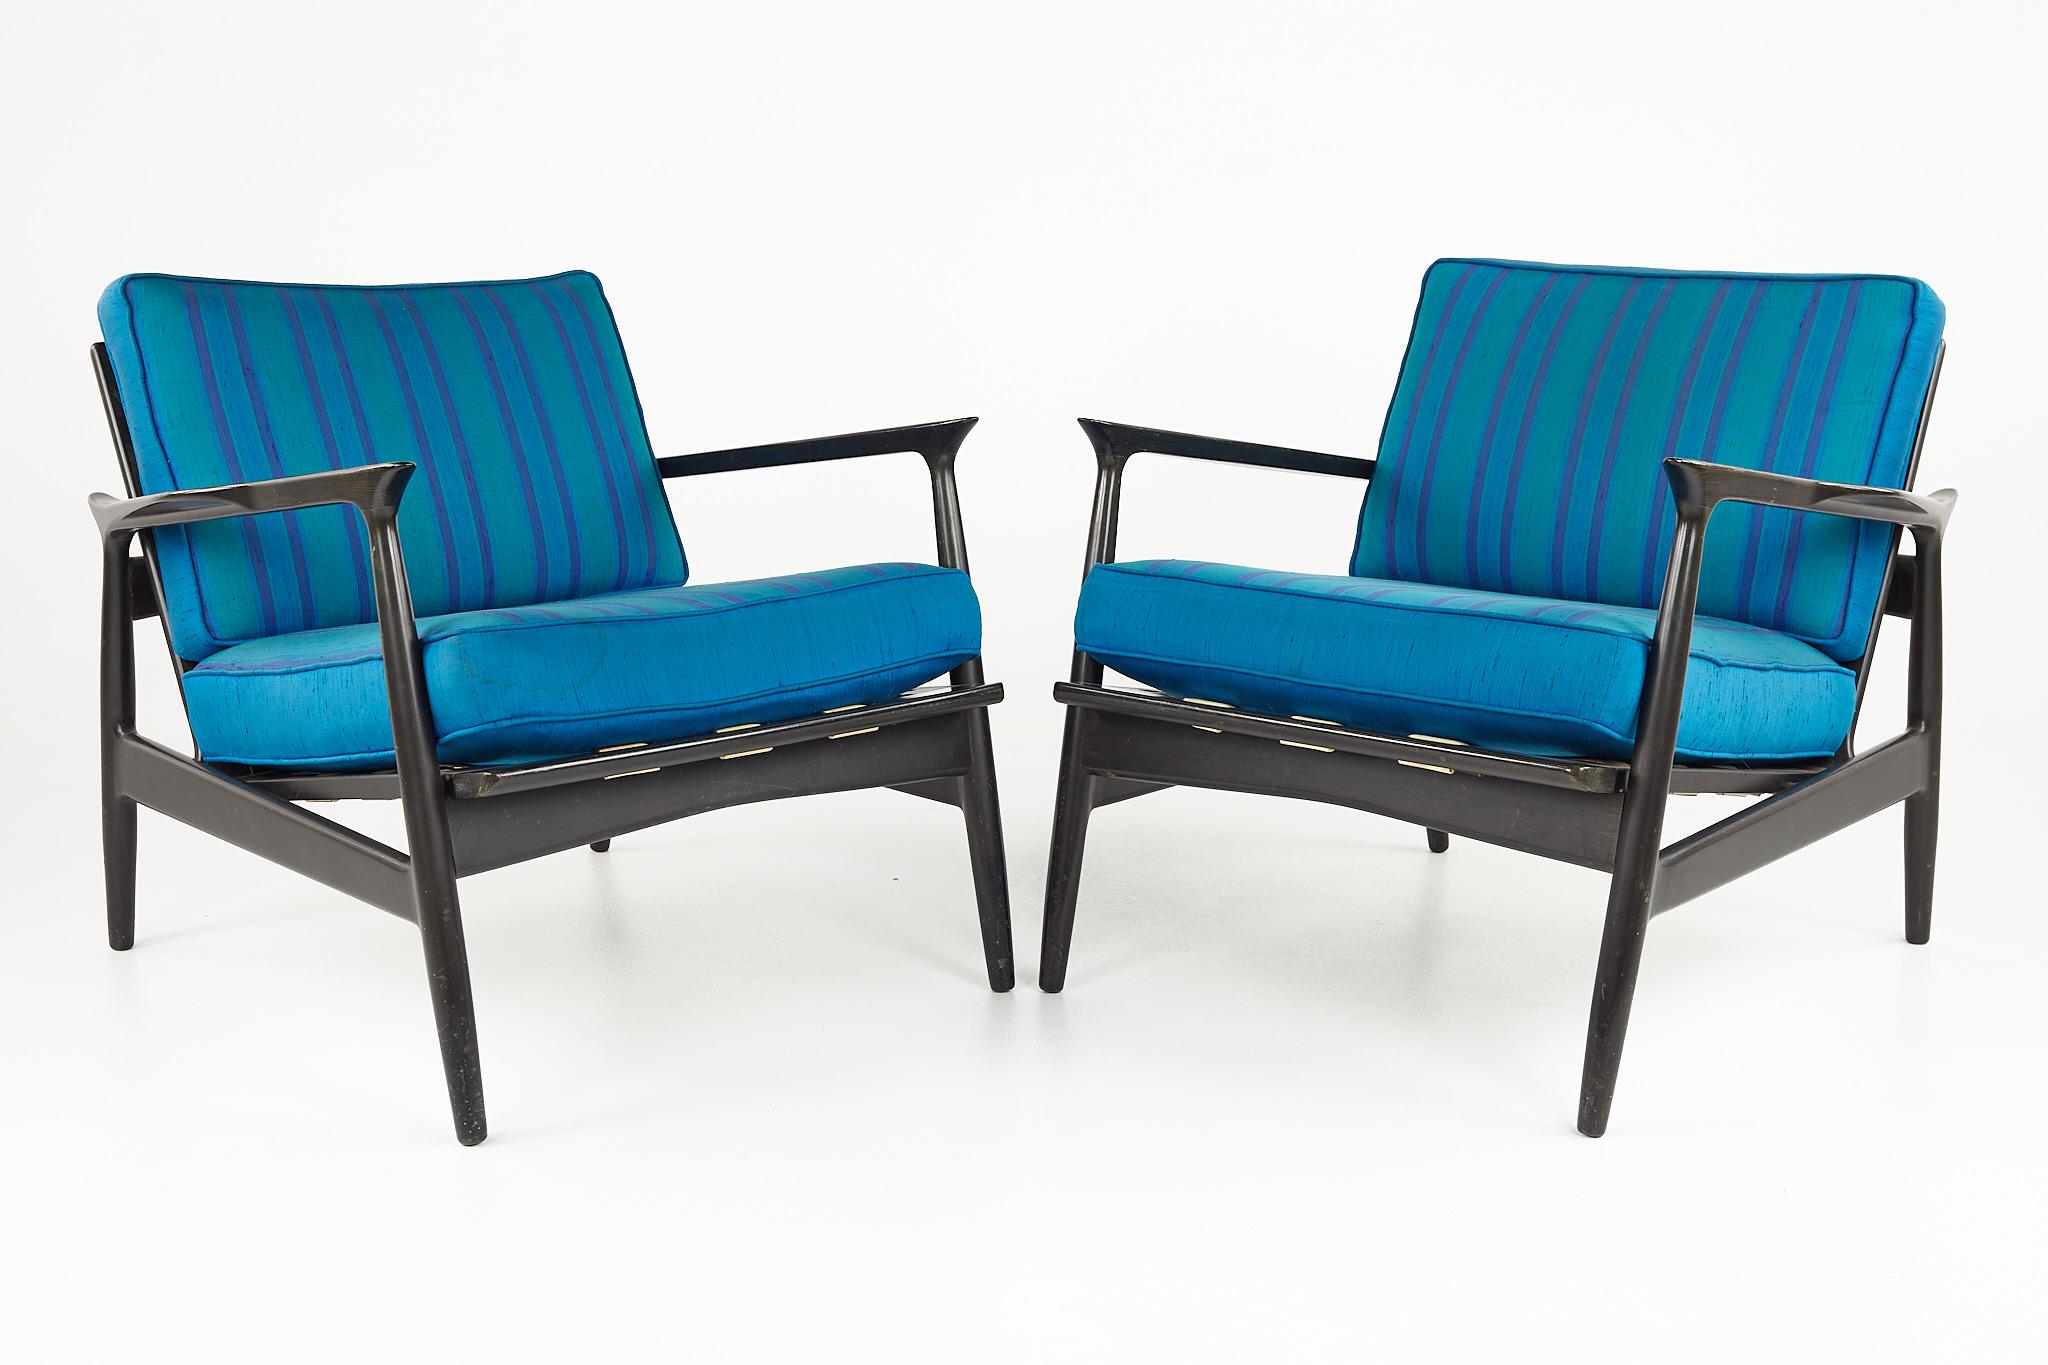 IB Kofod Larsen mid century ebonized and Grasscloth Danish lounge chairs - pair

Each chair measures: 30 wide x 32 deep x 28 inches high, with a seat height of 16 and arm height of 23 inches

All pieces of furniture can be had in what we call